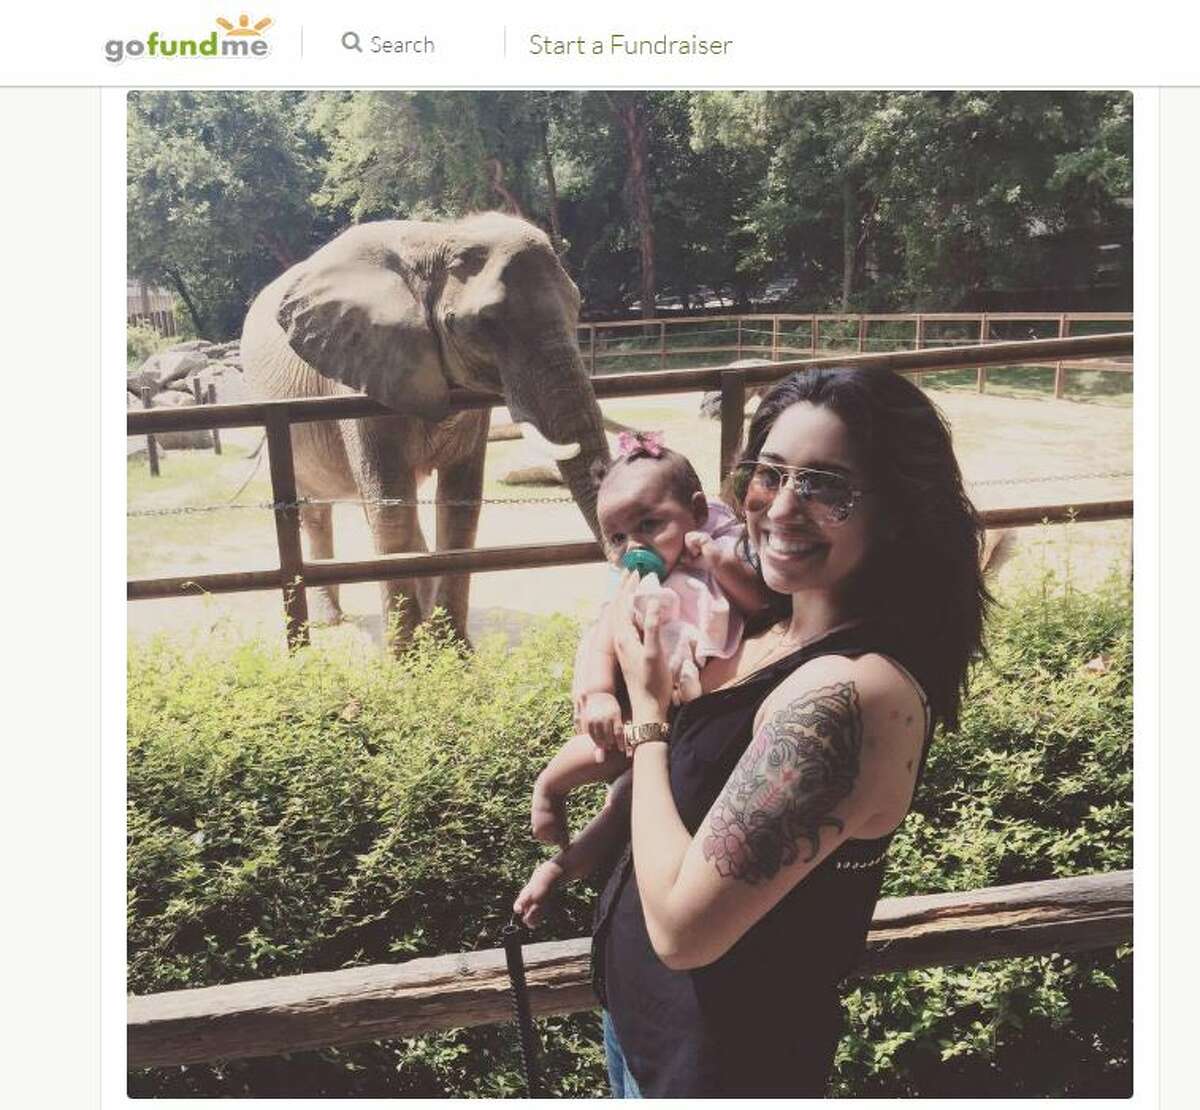 Karlyn Ramirez, 24, was found dead Aug. 24, 2015 with her then five-month-old daughter by her side. An Army soldier stationed in San Antonio and his girlfriend were arrested Thursday Oct. 6, 2016 in connection with the killing.